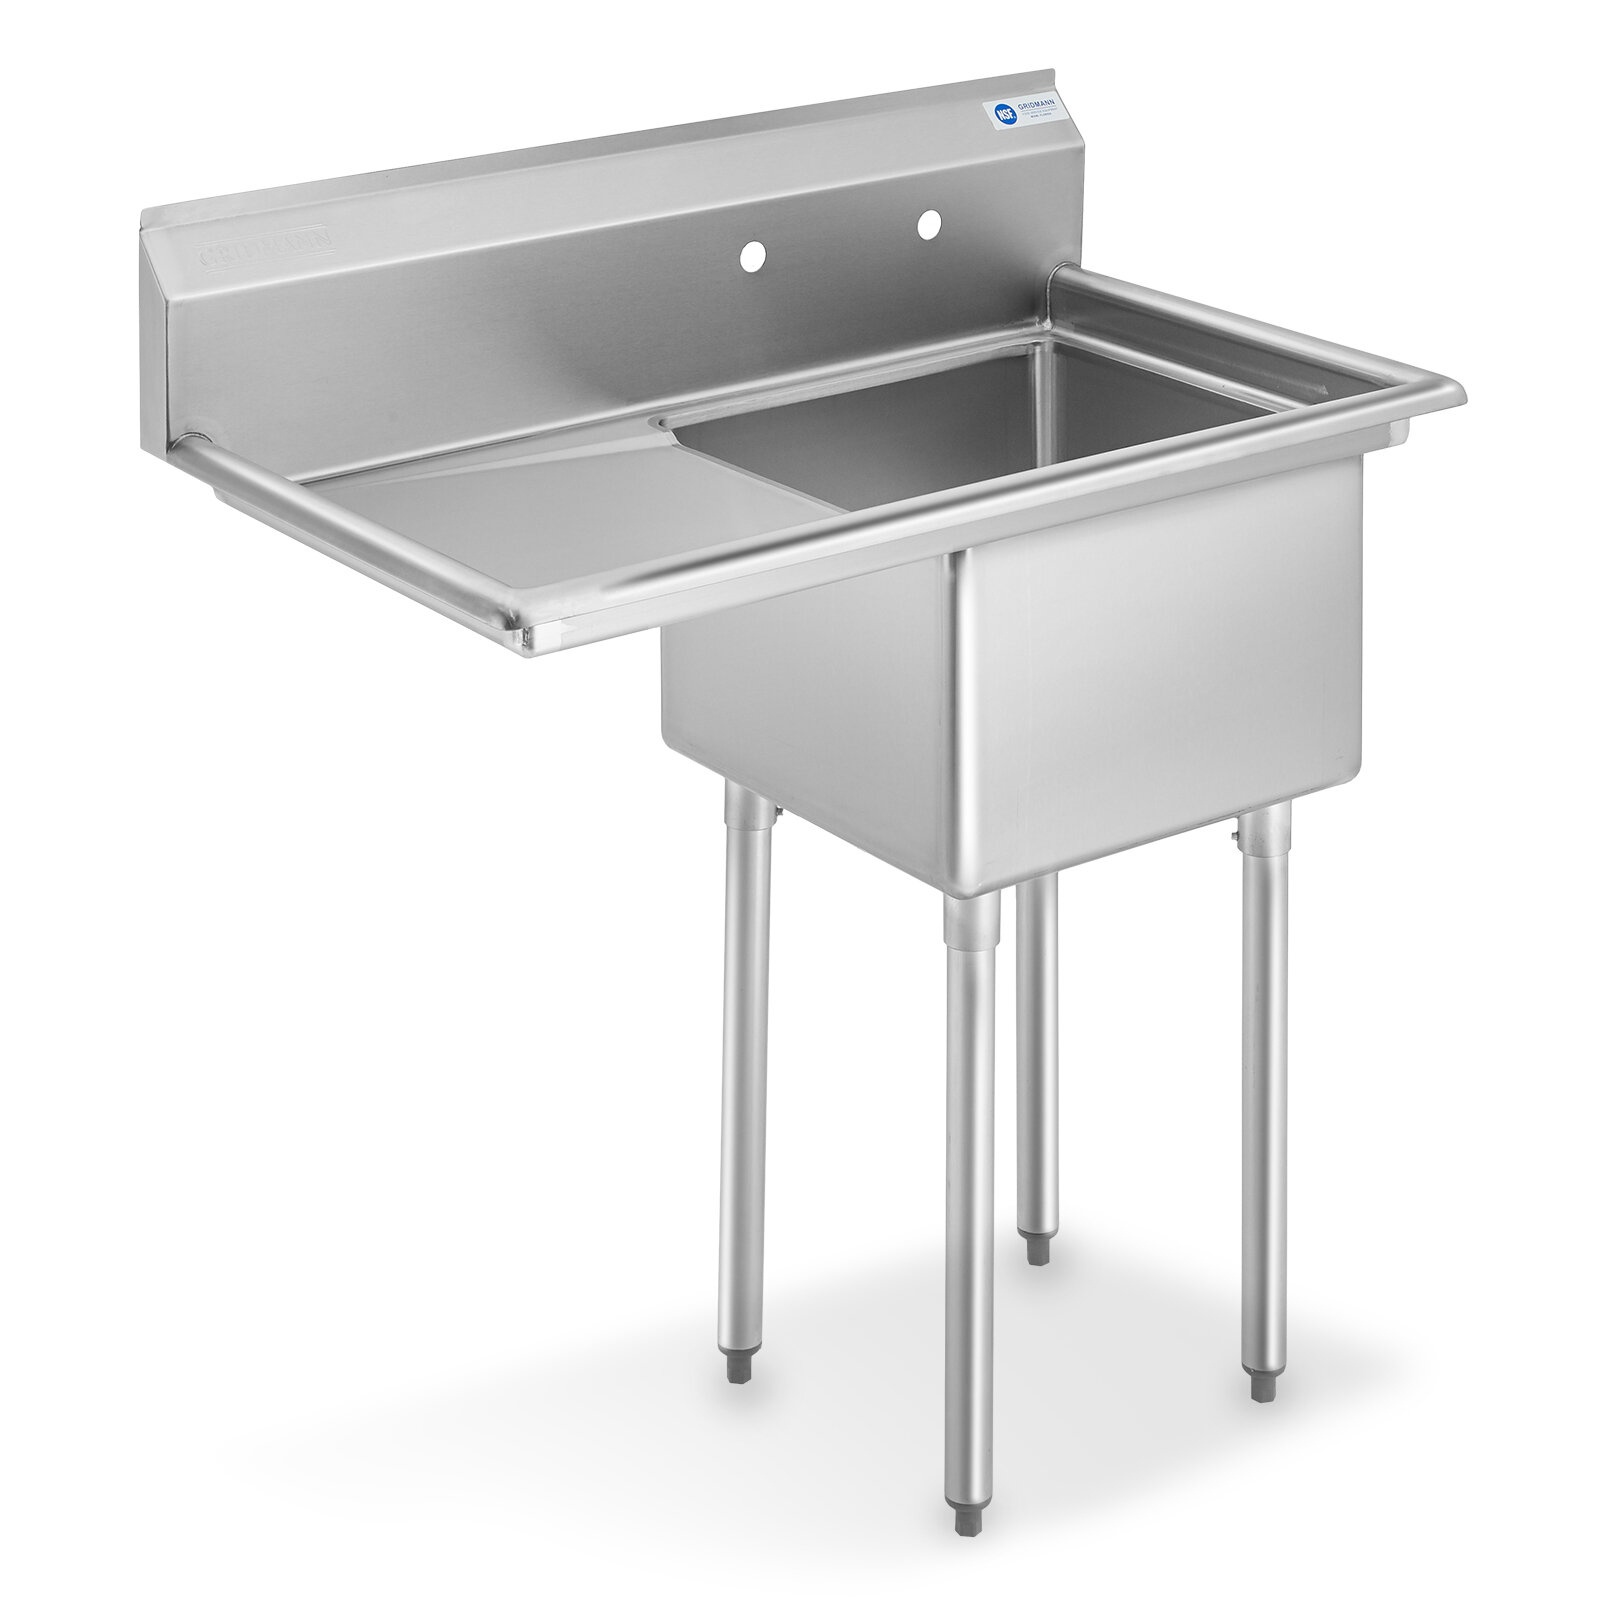 https://visualhunt.com/photos/23/39-l-x-24-w-free-standing-service-sink-with-left-side-drainboard.jpg